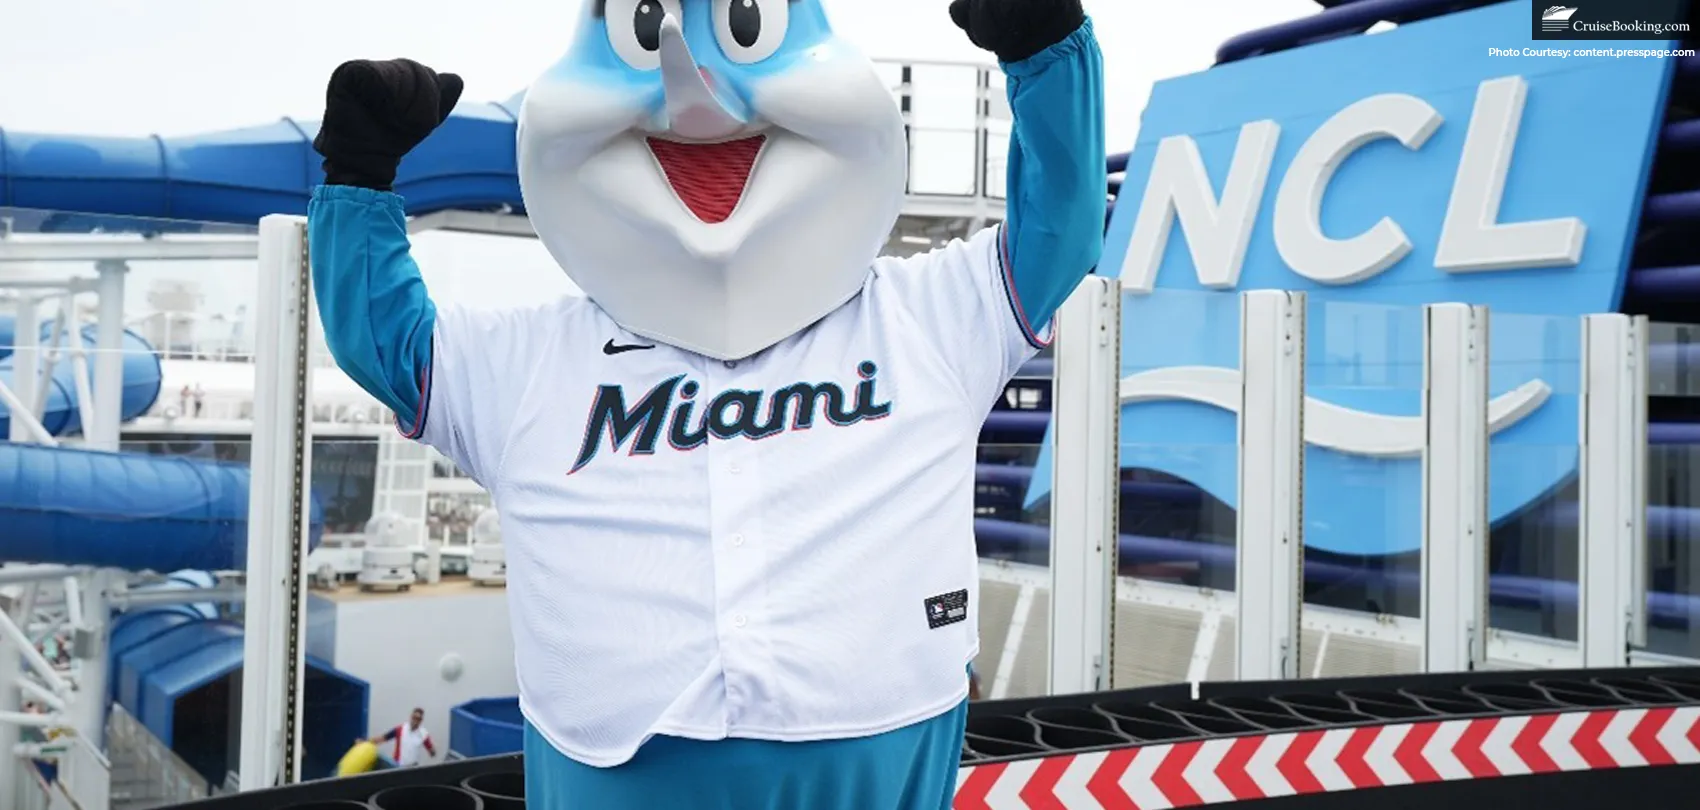 Miami Marlins and NCL Award Fans with $1,000 and Cruise Giveaways